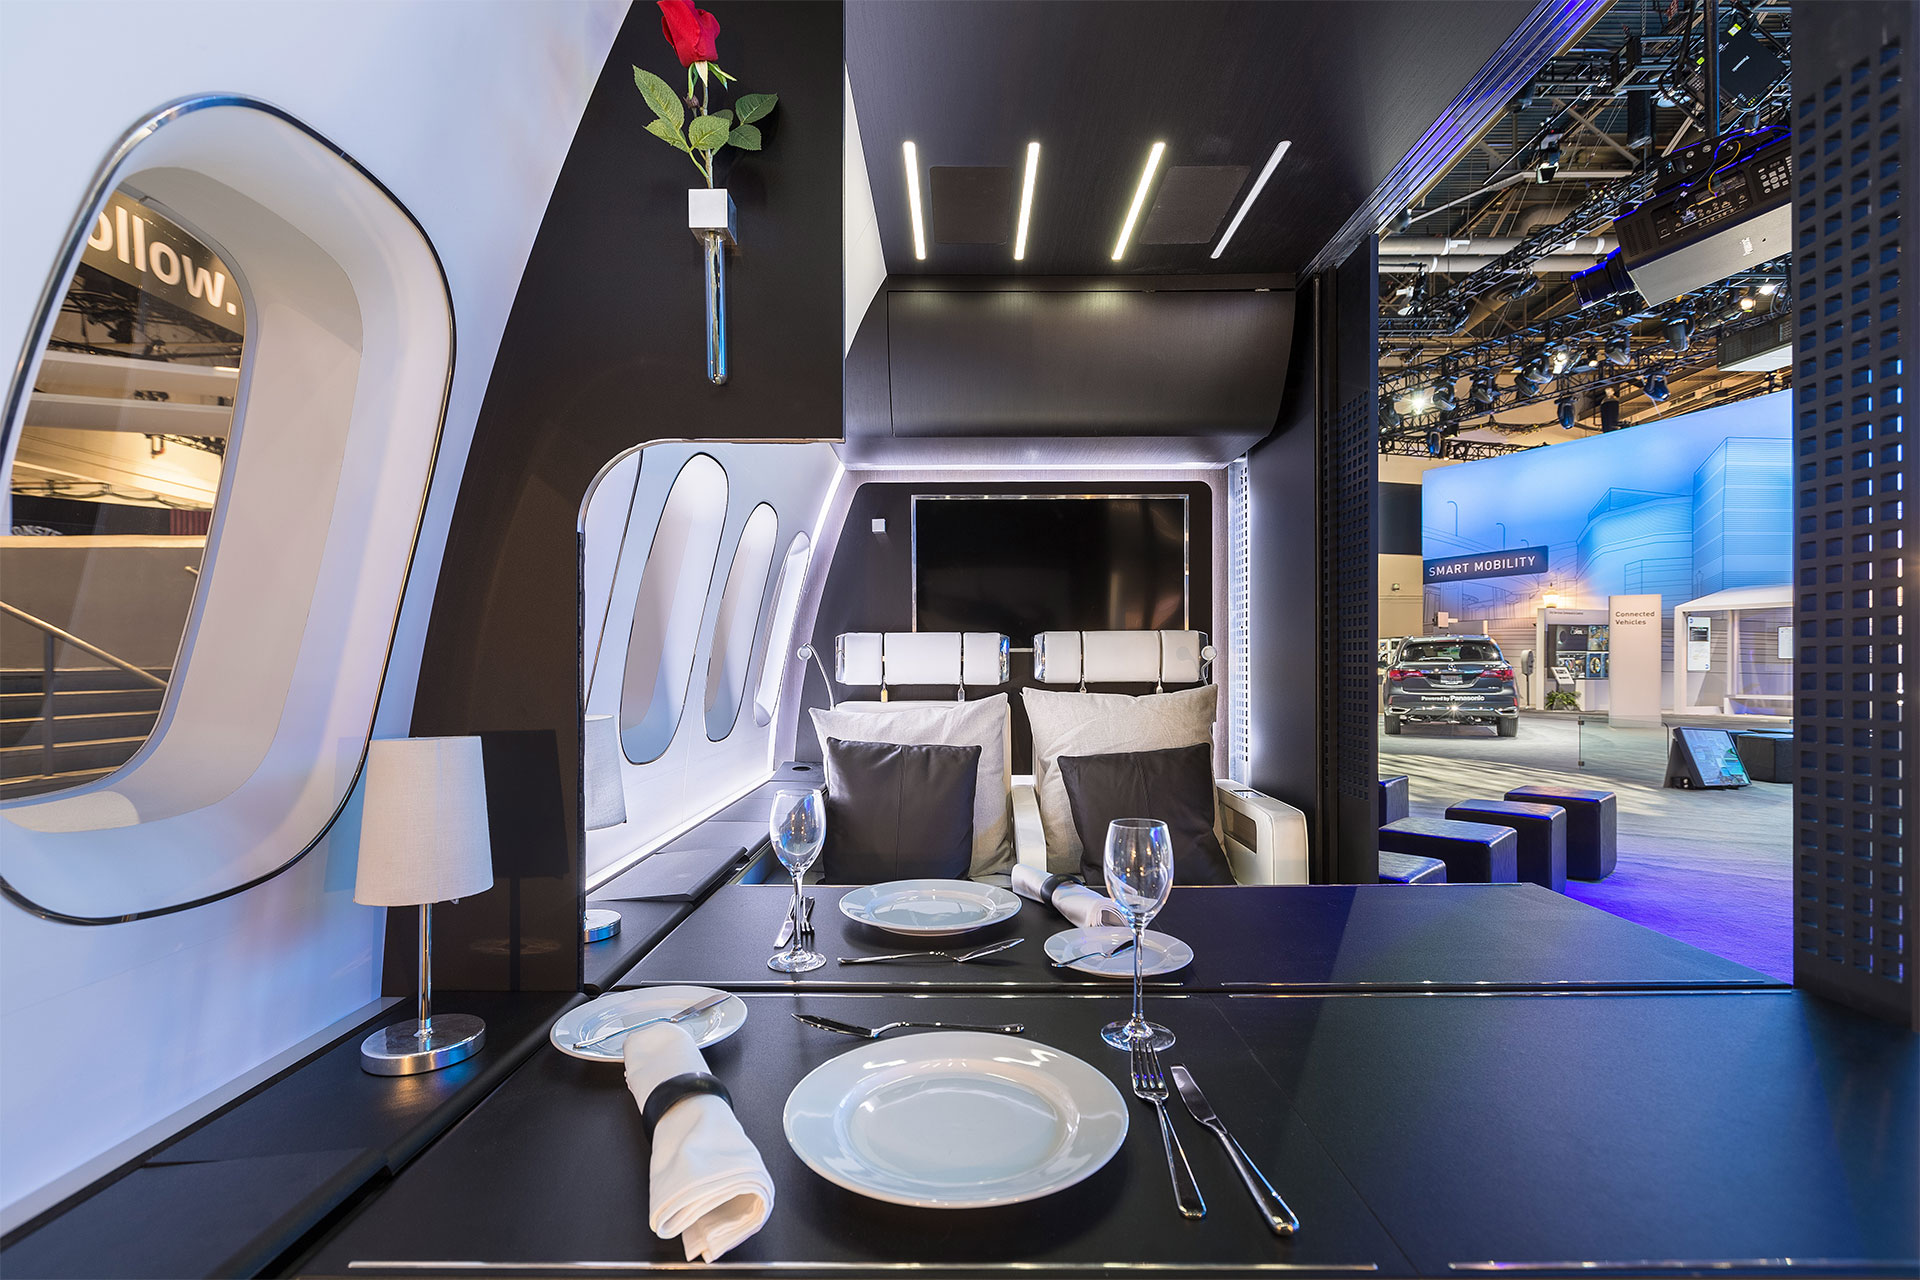 Replica of a First-class aircraft cabin as a CES 2016 trade show exhibit with dinnerware laid out on a black table with white walls shot from the perspective of a seated passenger.